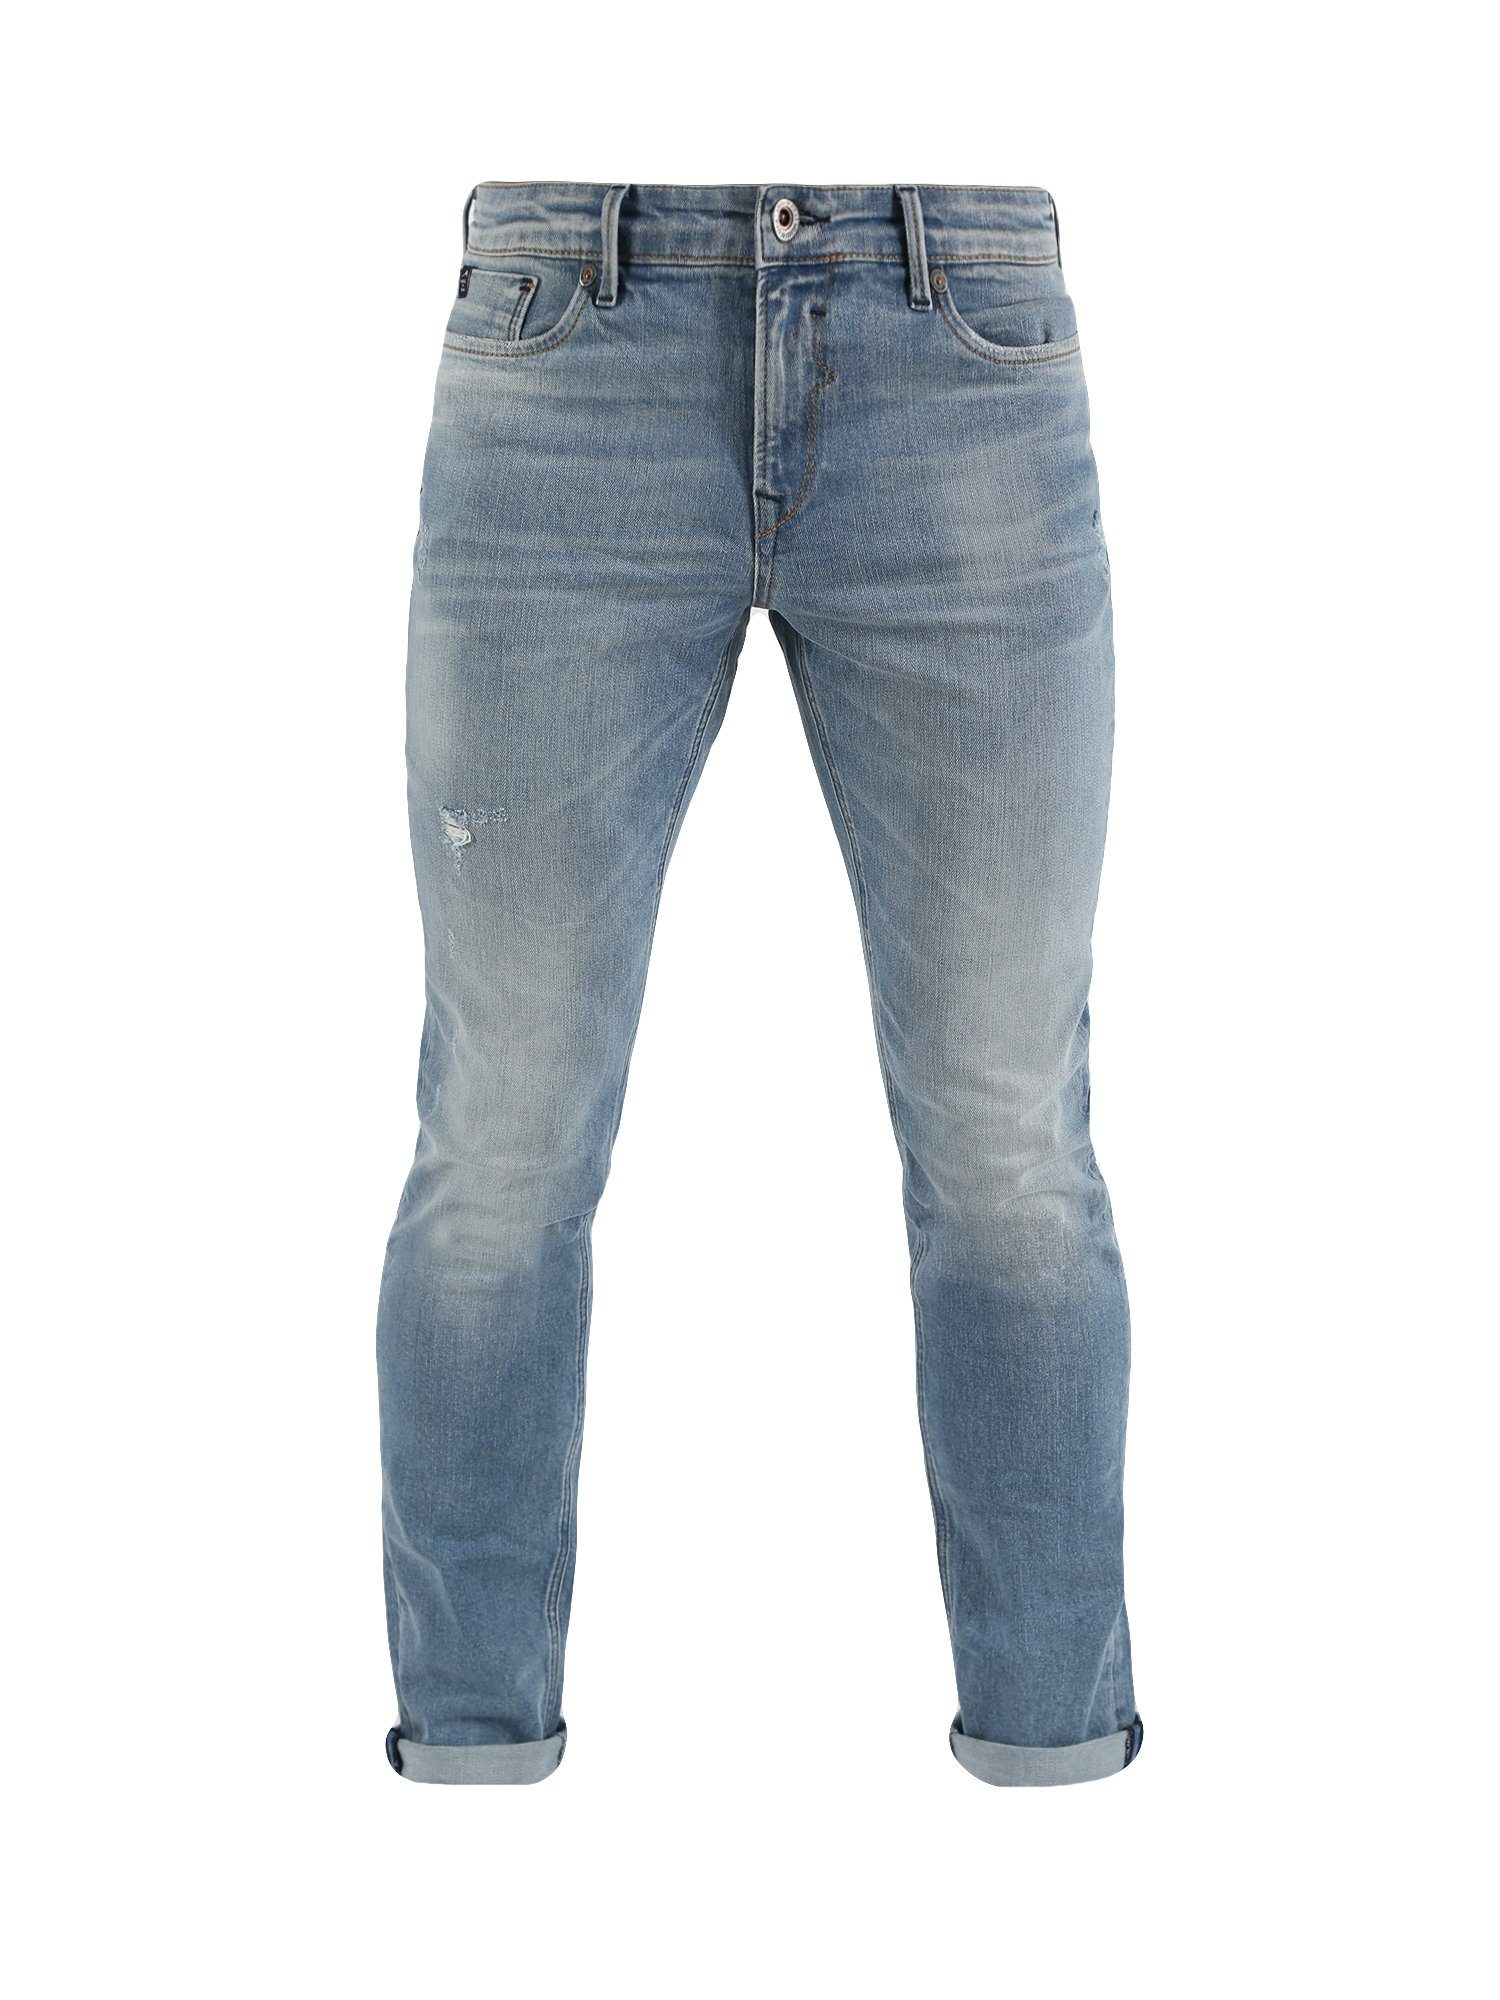 im of Slim-fit-Jeans Marcel Vermont Denim Miracle Blue 5-Pocket-Style